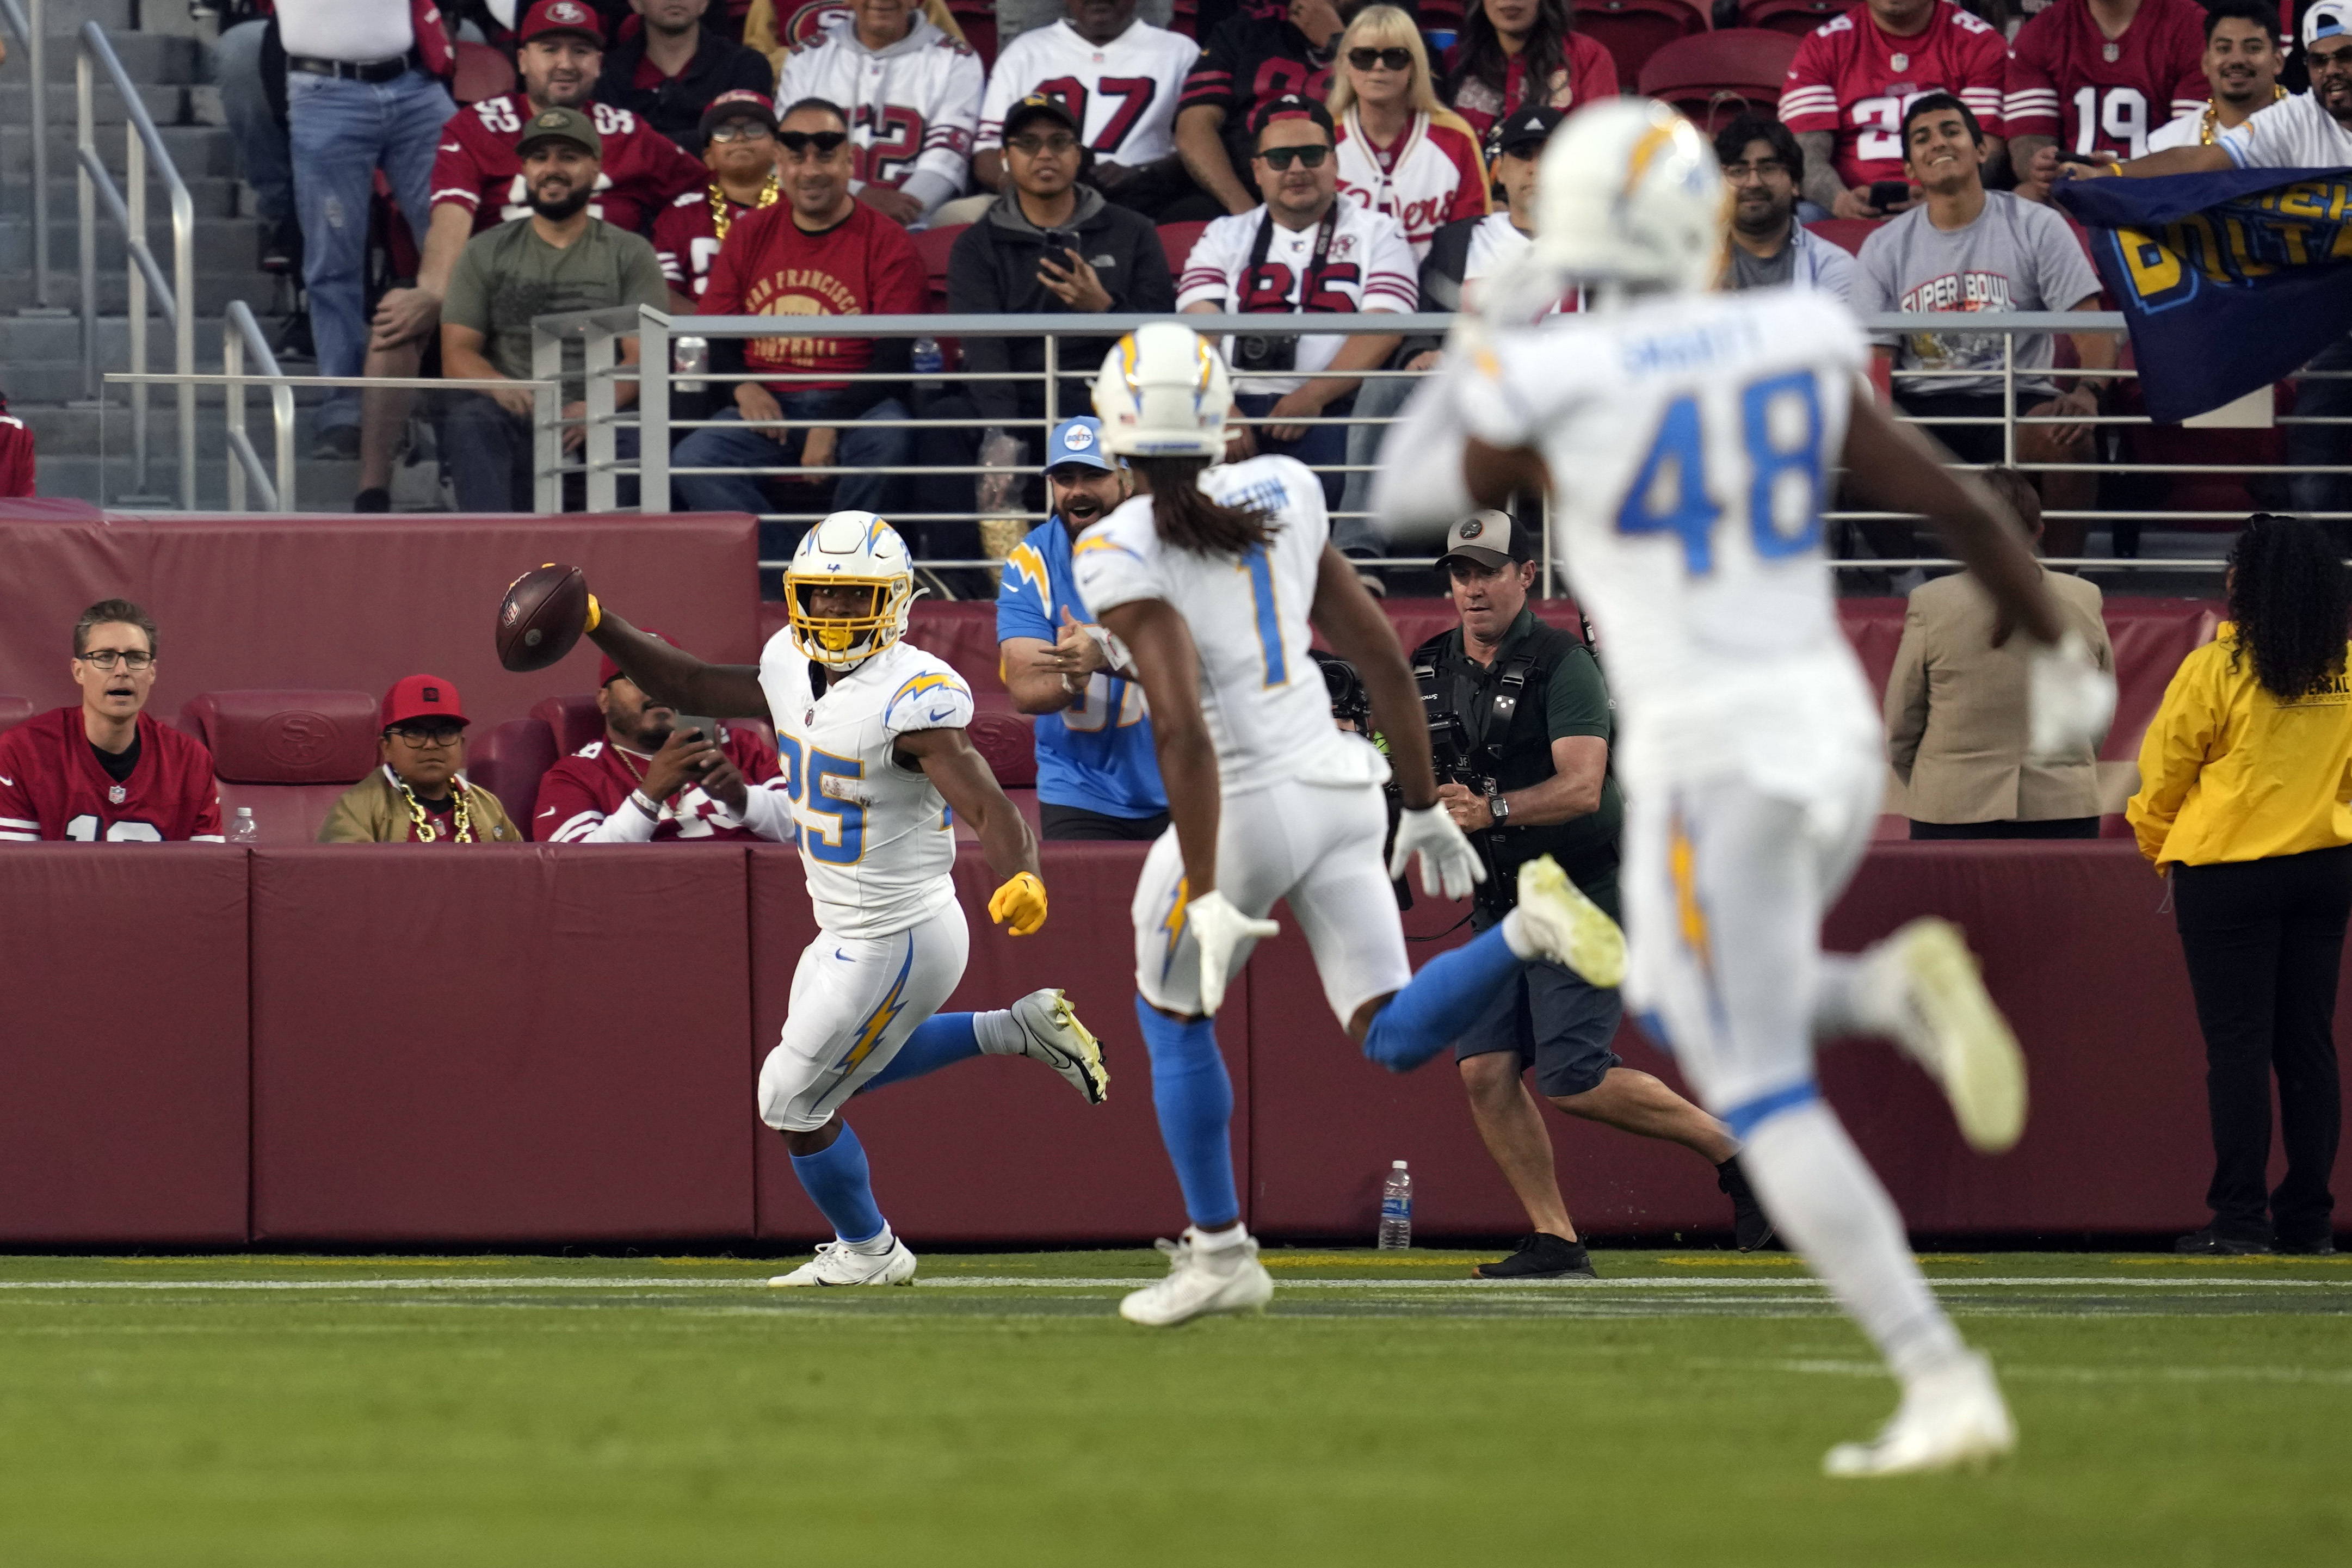 Chargers vs. 49ers Recap: Max Duggan, run offense lead Bolts over Niners  23-12 - Bolts From The Blue